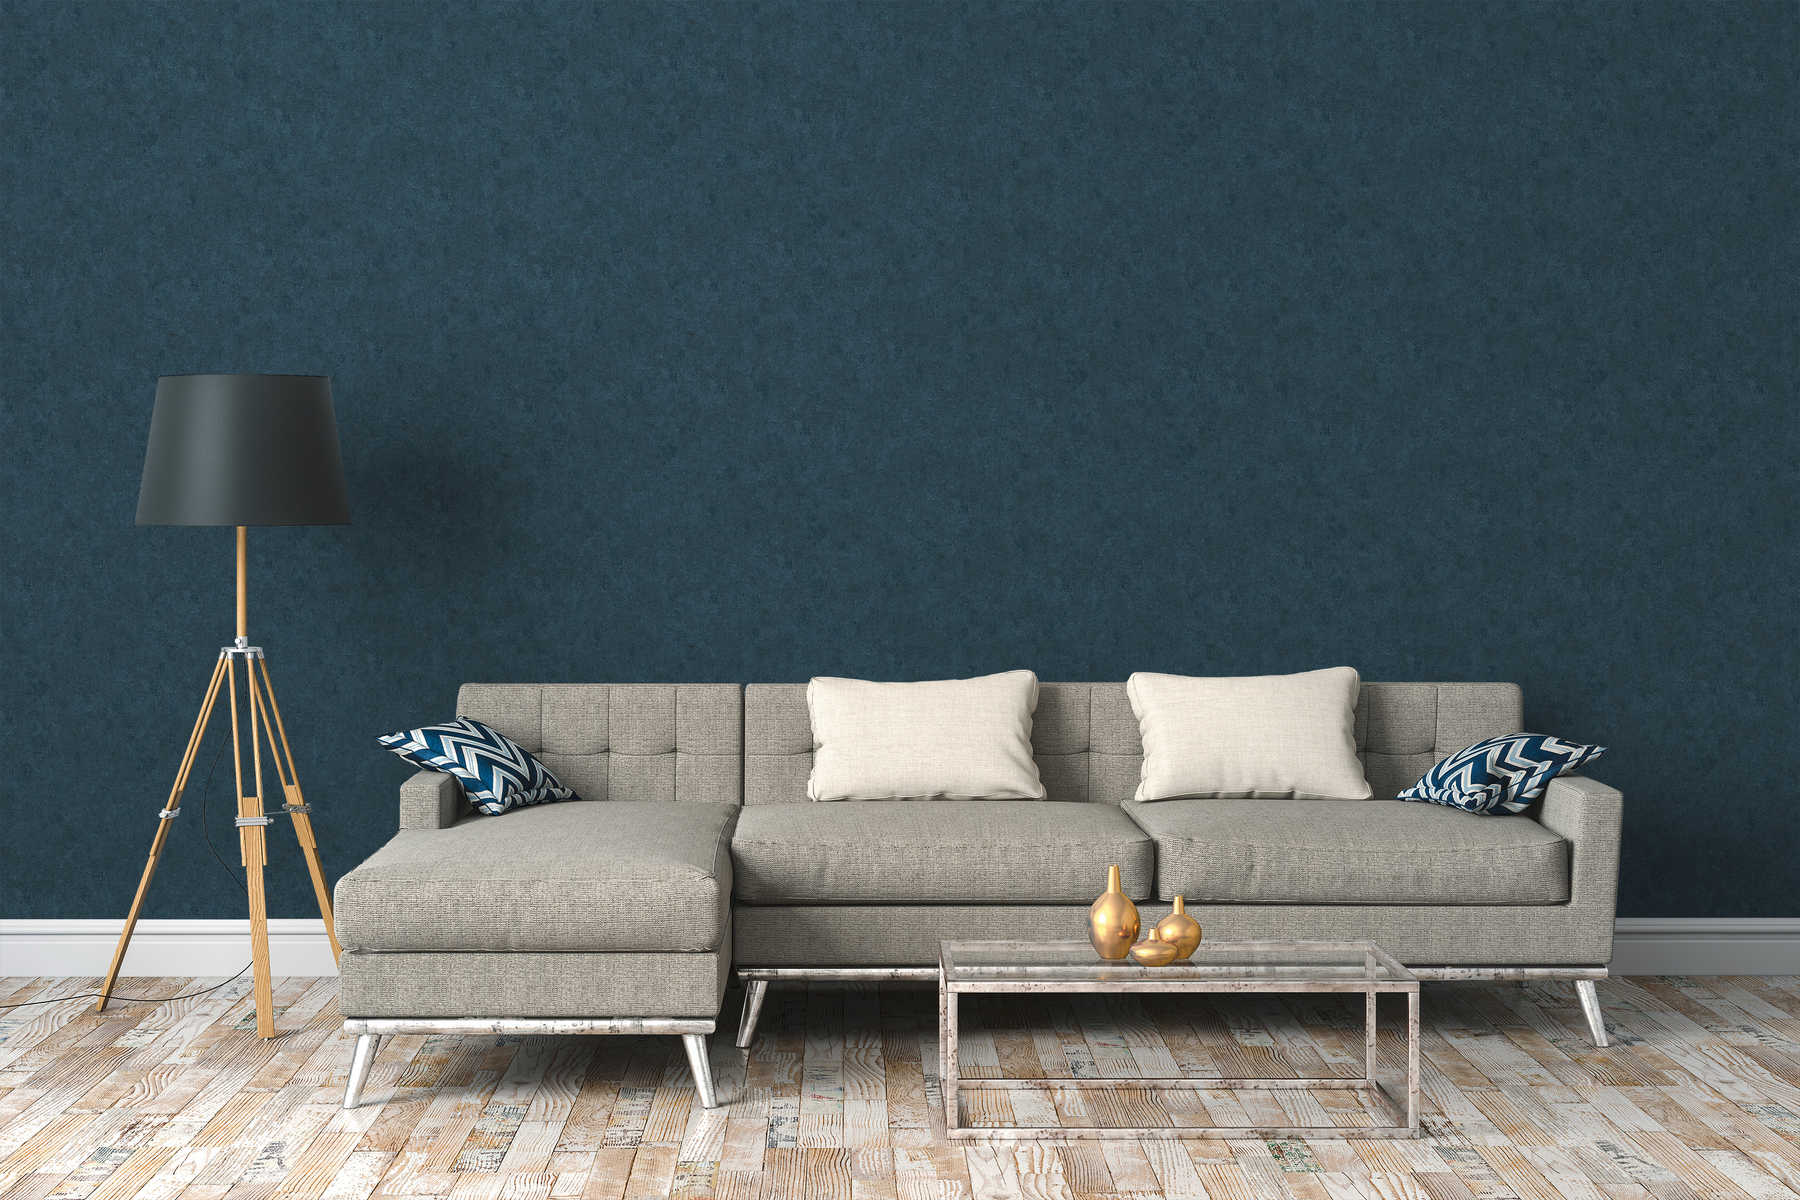             Wallpaper with subtle colour pattern in used look - blue
        